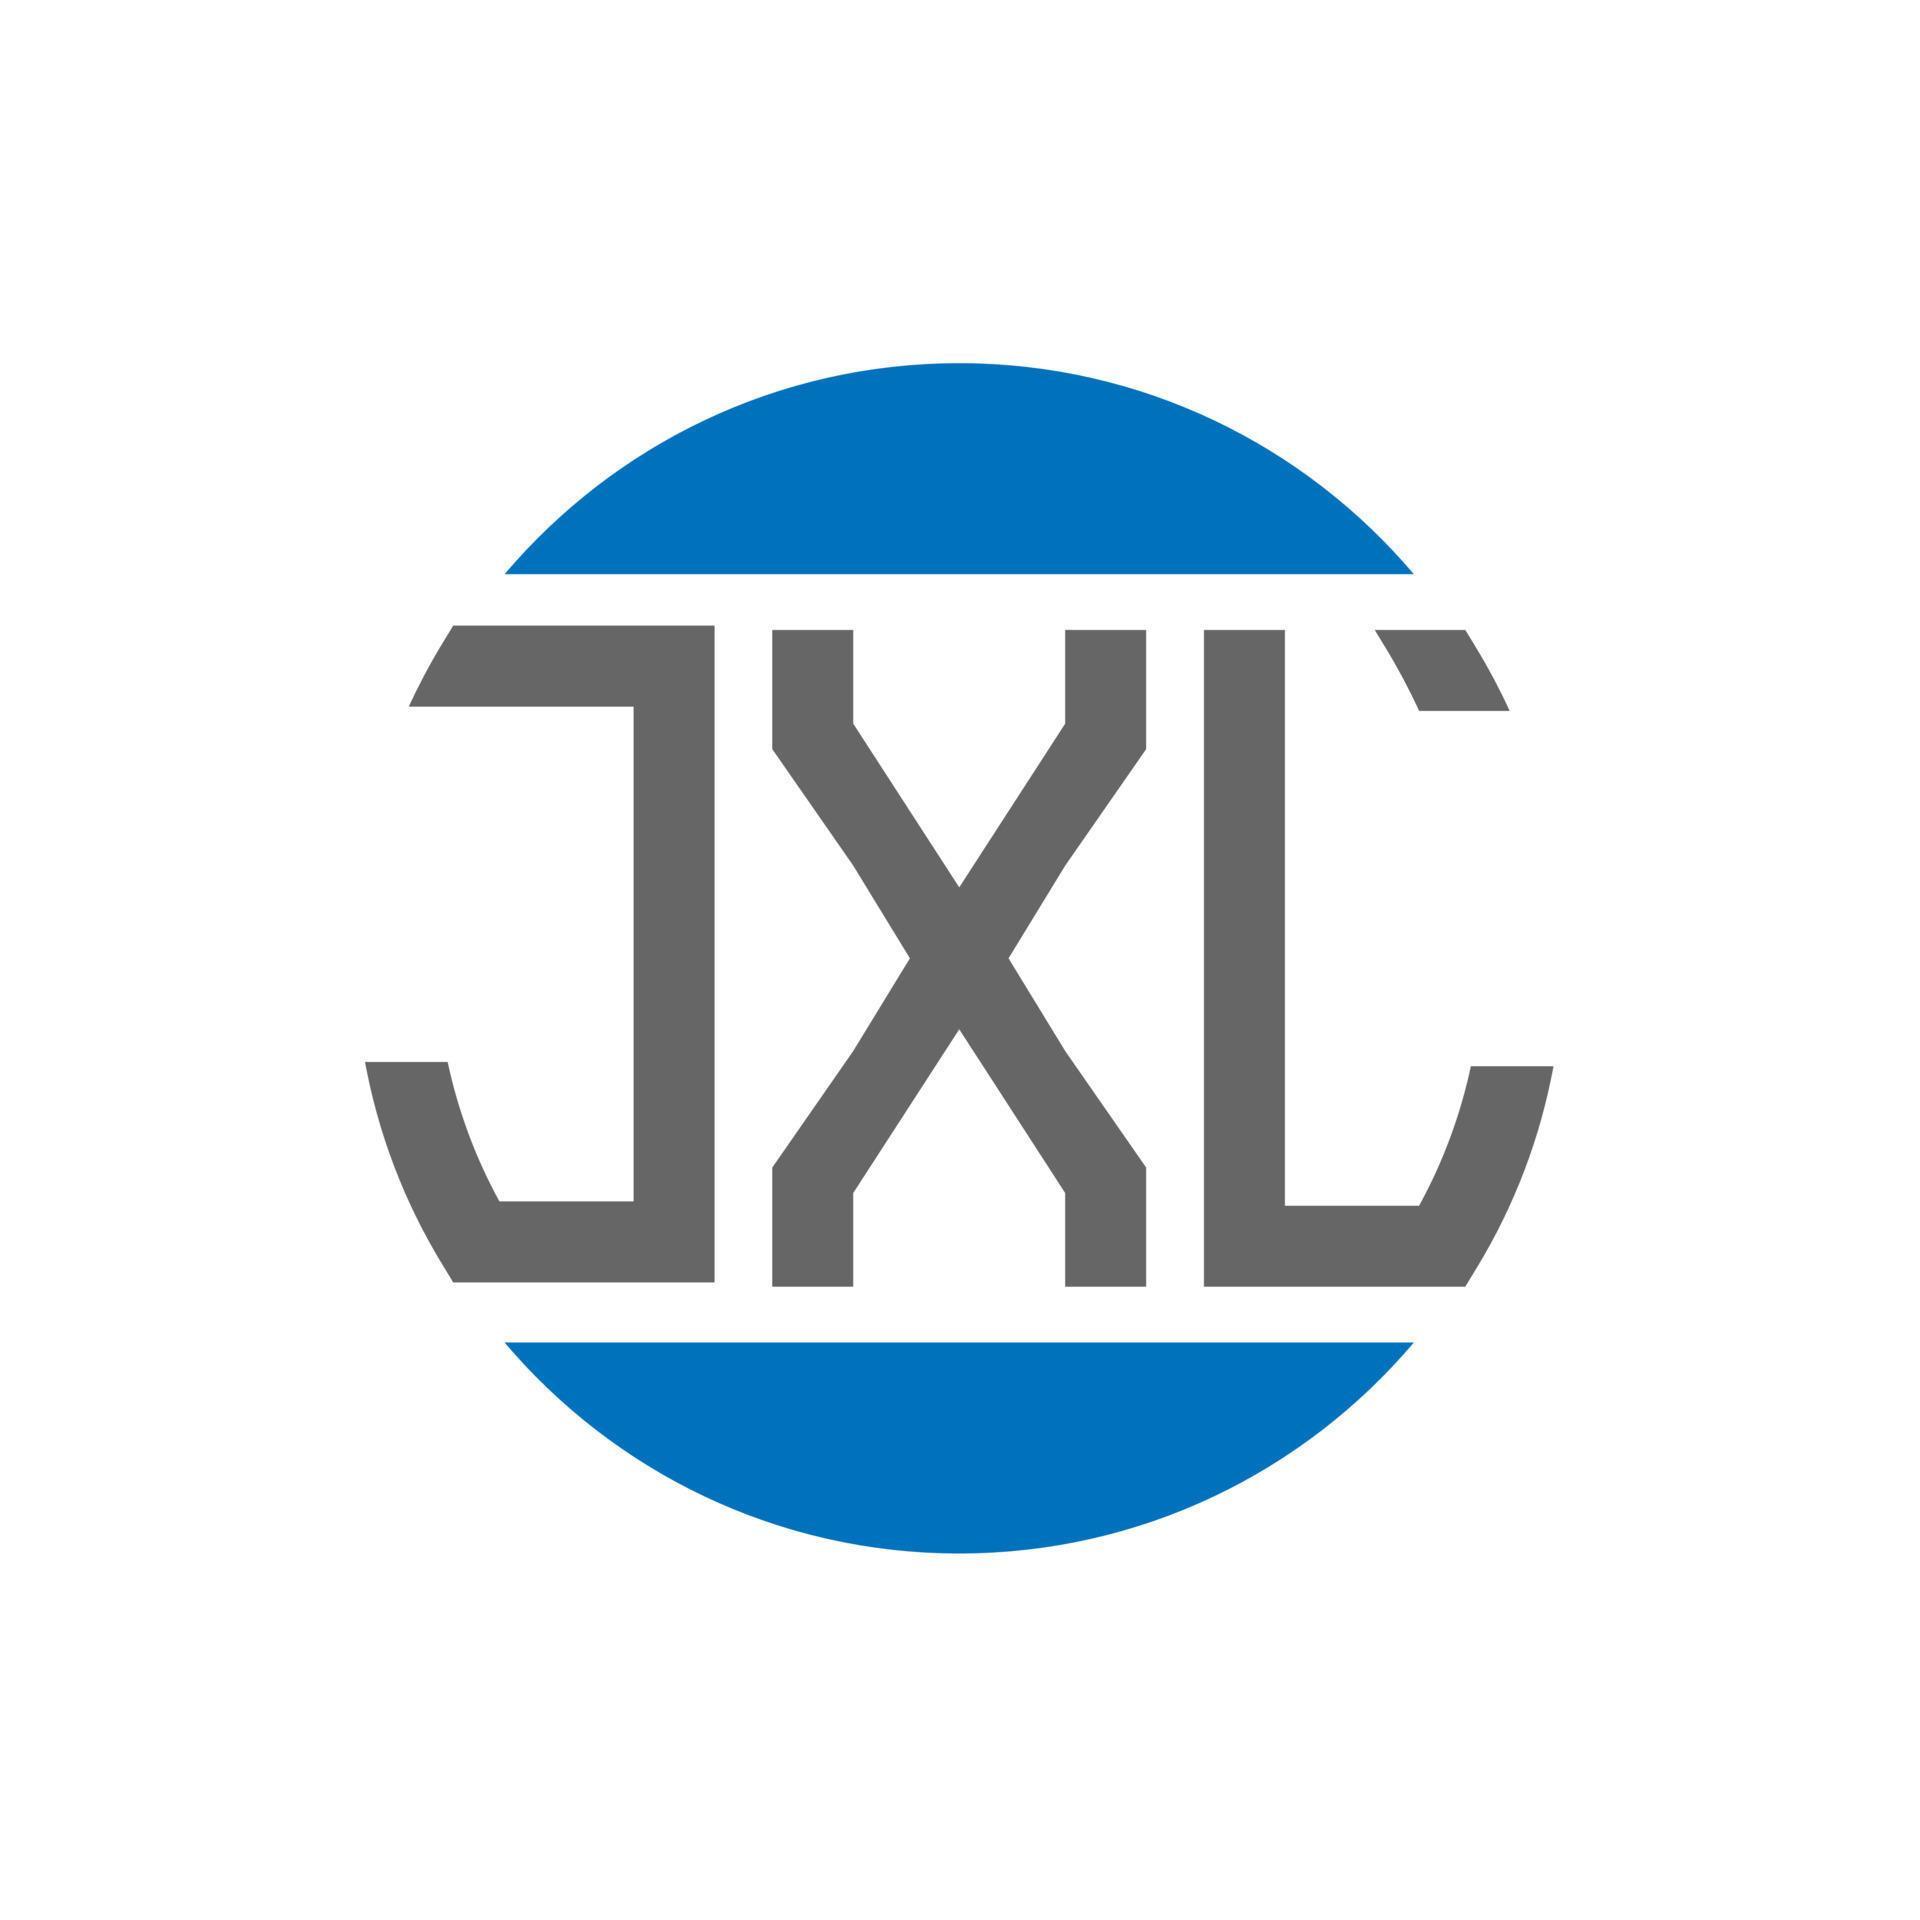 JXL File - What is a .jxl file and how do I open it?